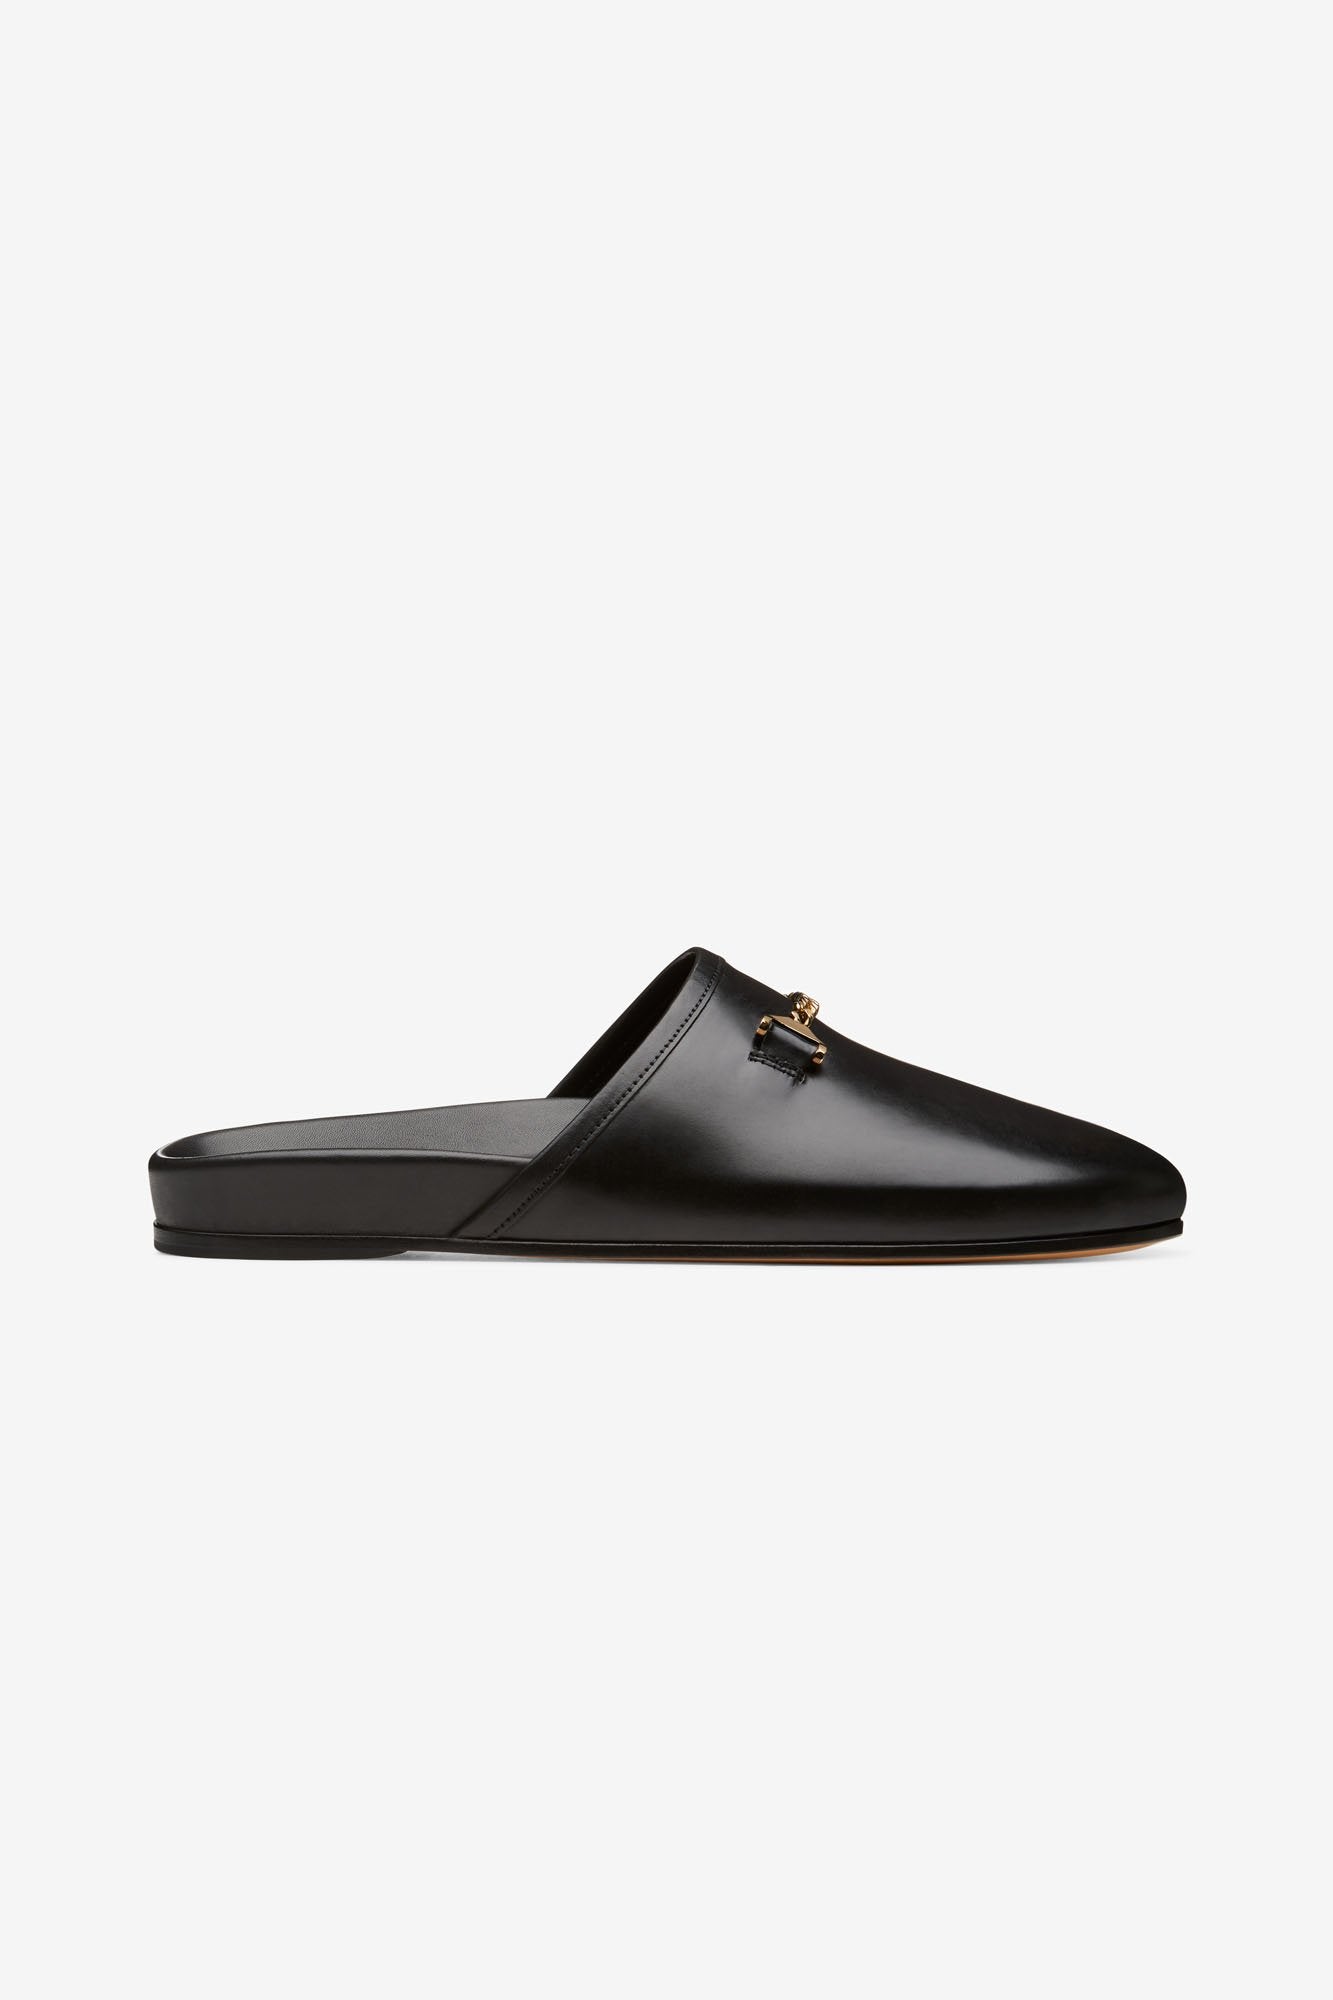 Hyusto Quincy Slipper Black Leather side view